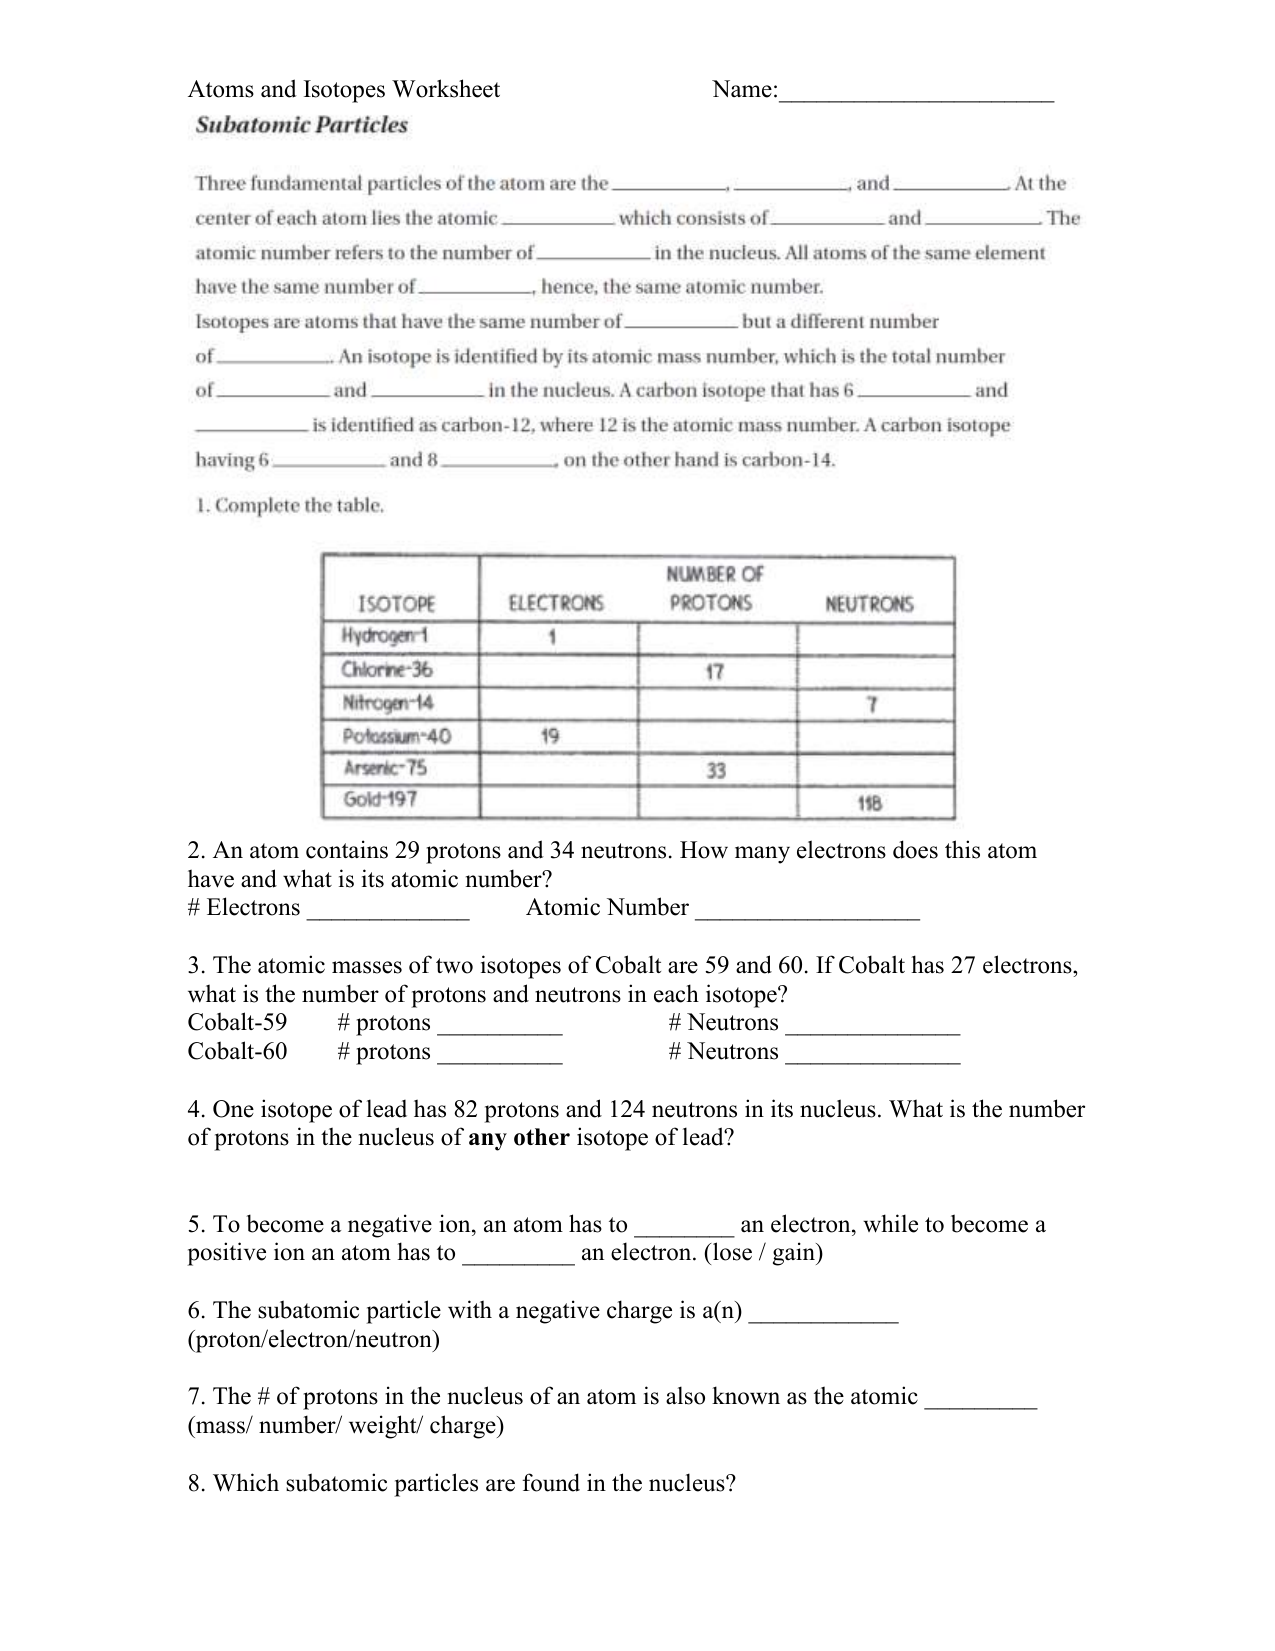 Atoms and Isotopes Worksheet For Atoms And Isotopes Worksheet Answers